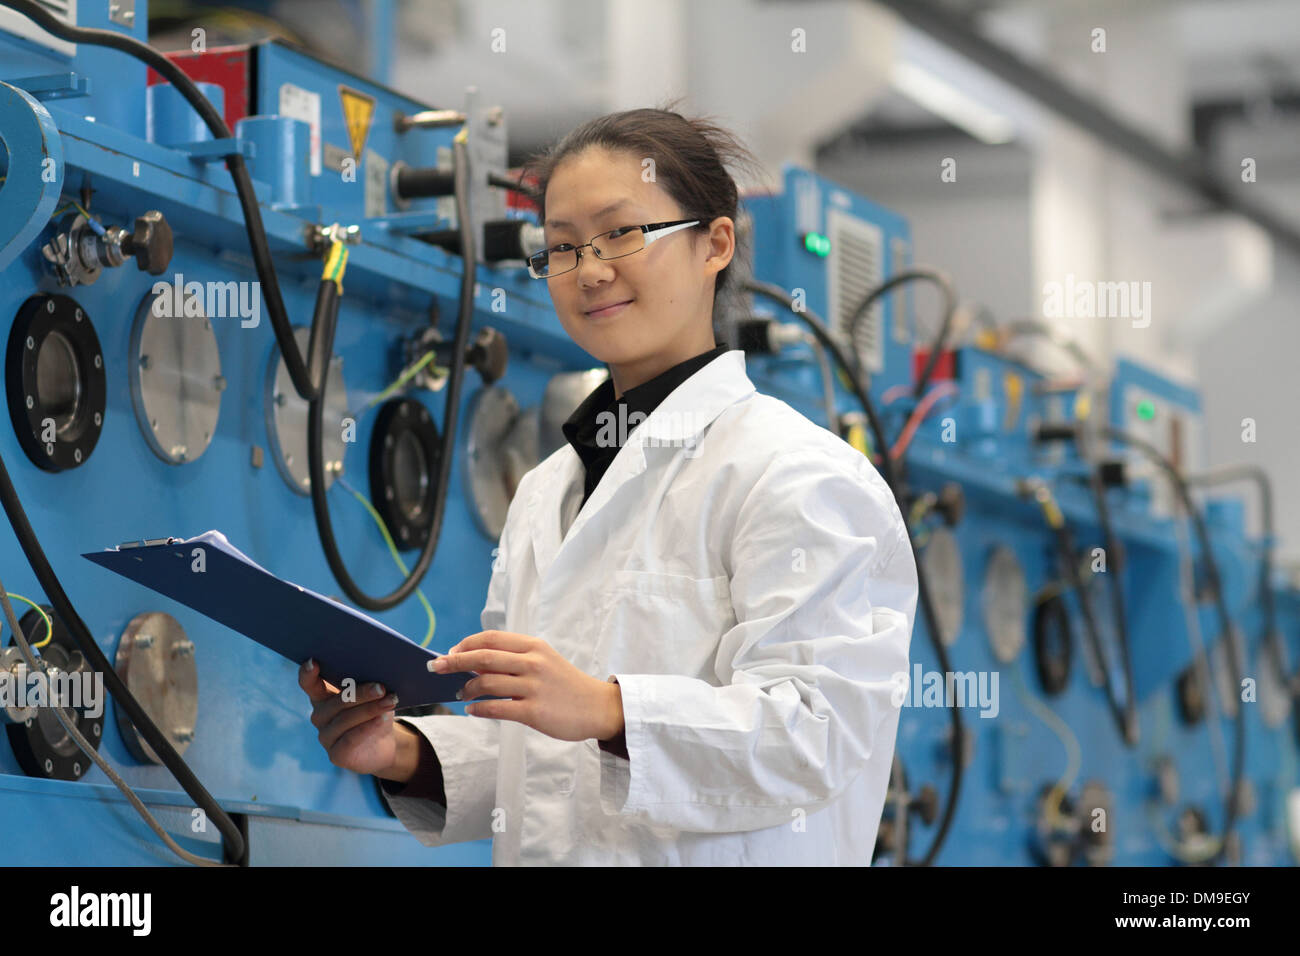 An Asia young woman working as a scientist in a technology lab Stock Photo